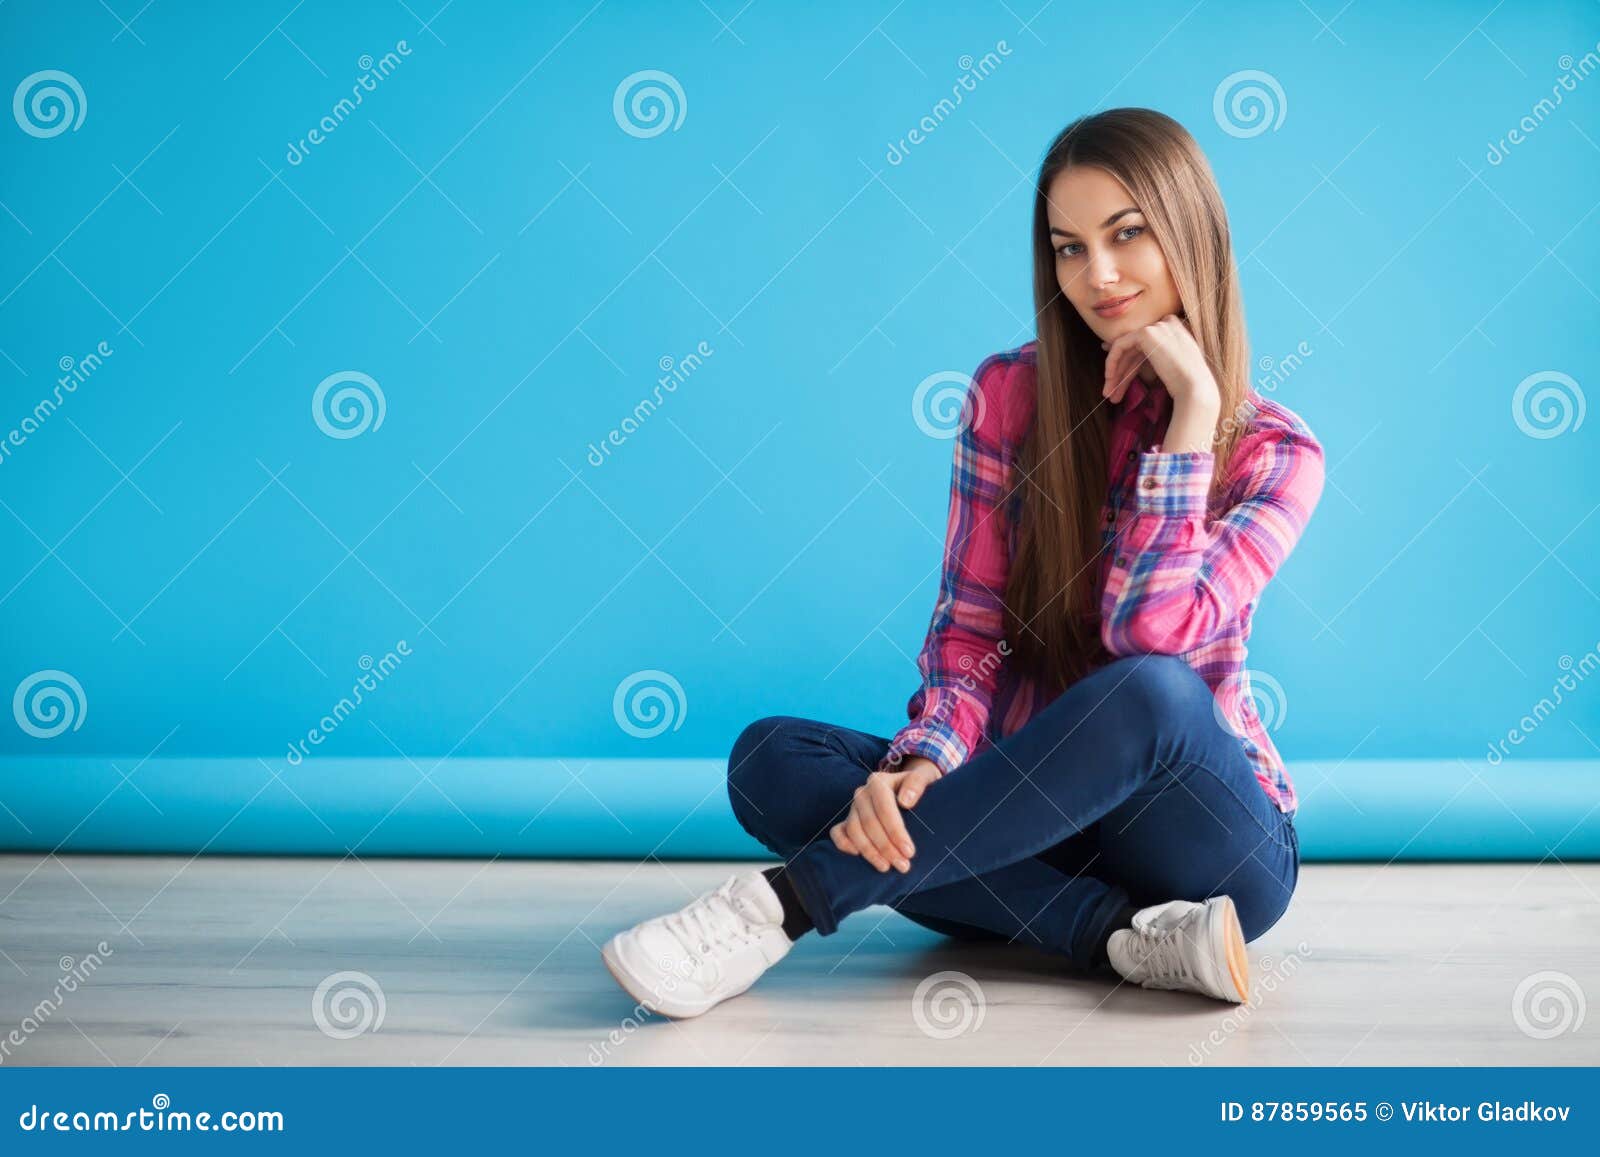 Young Beautiful Woman Sitting on the Floor on Blue Background Stock ...